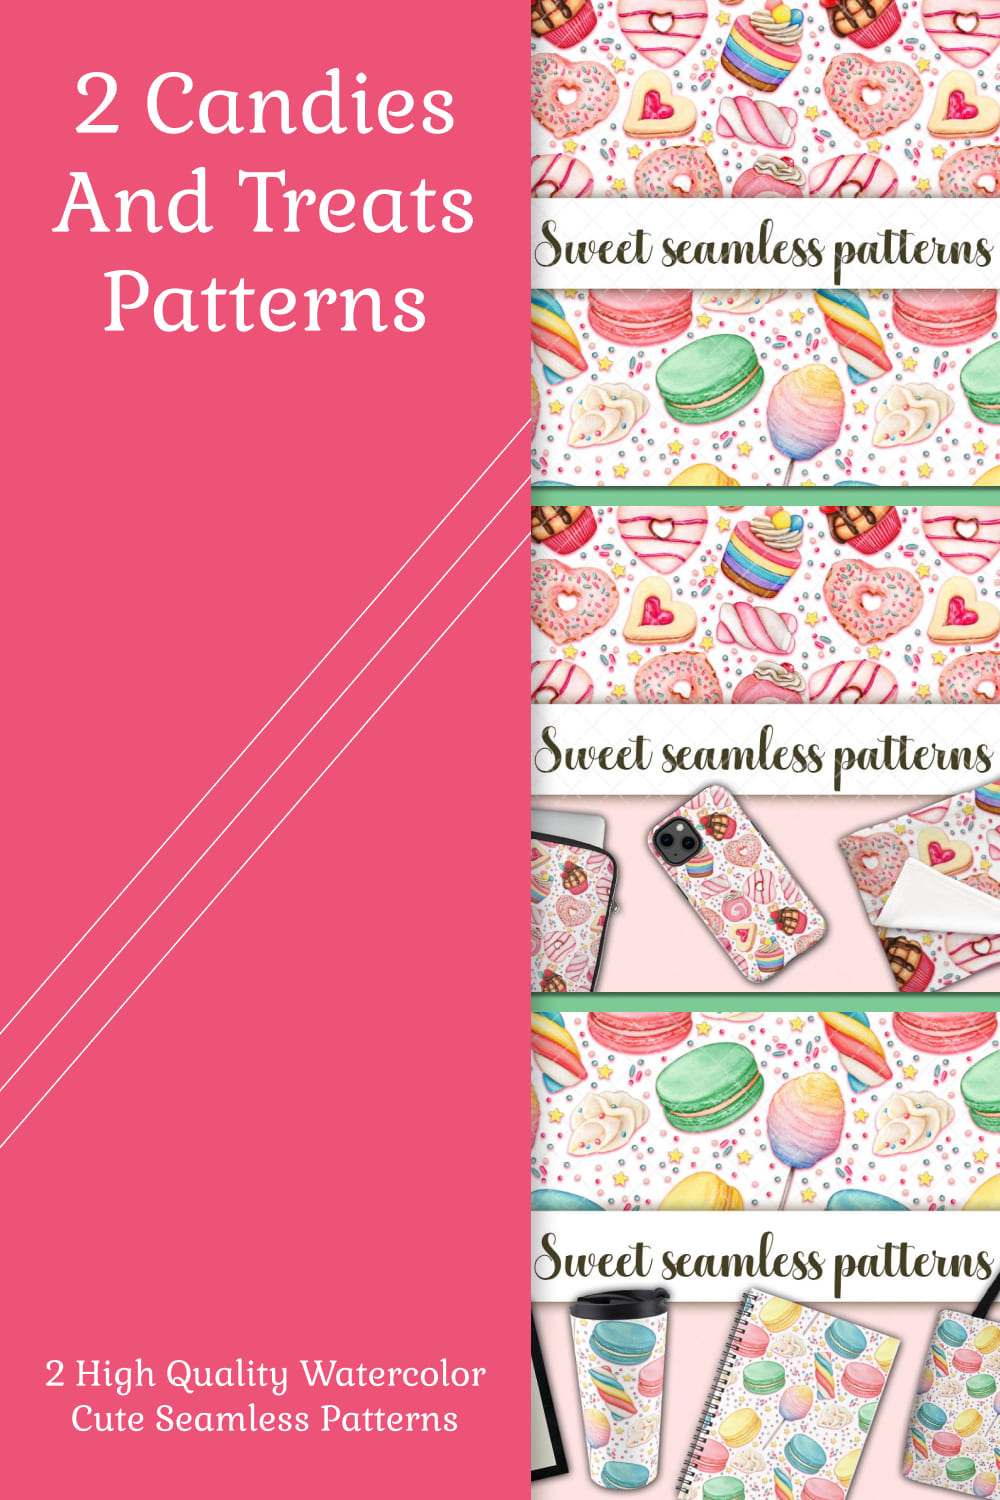 2 candies and treats patterns 03